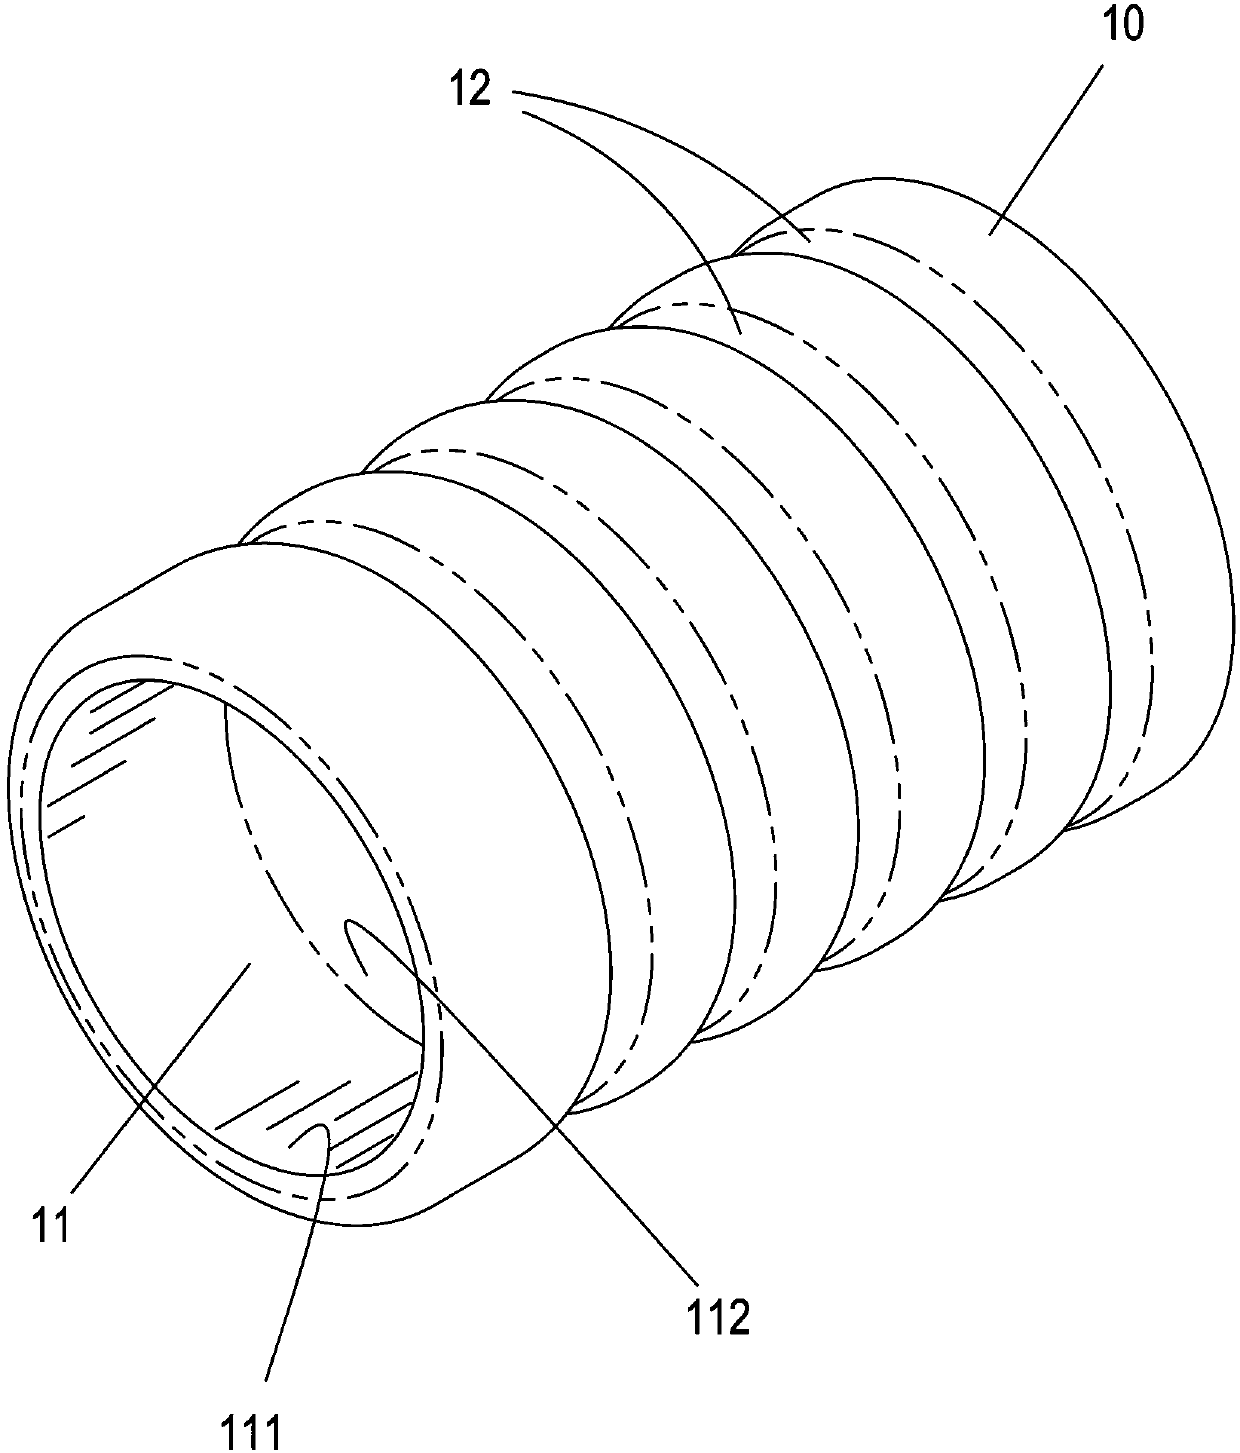 Sleeve ring structure